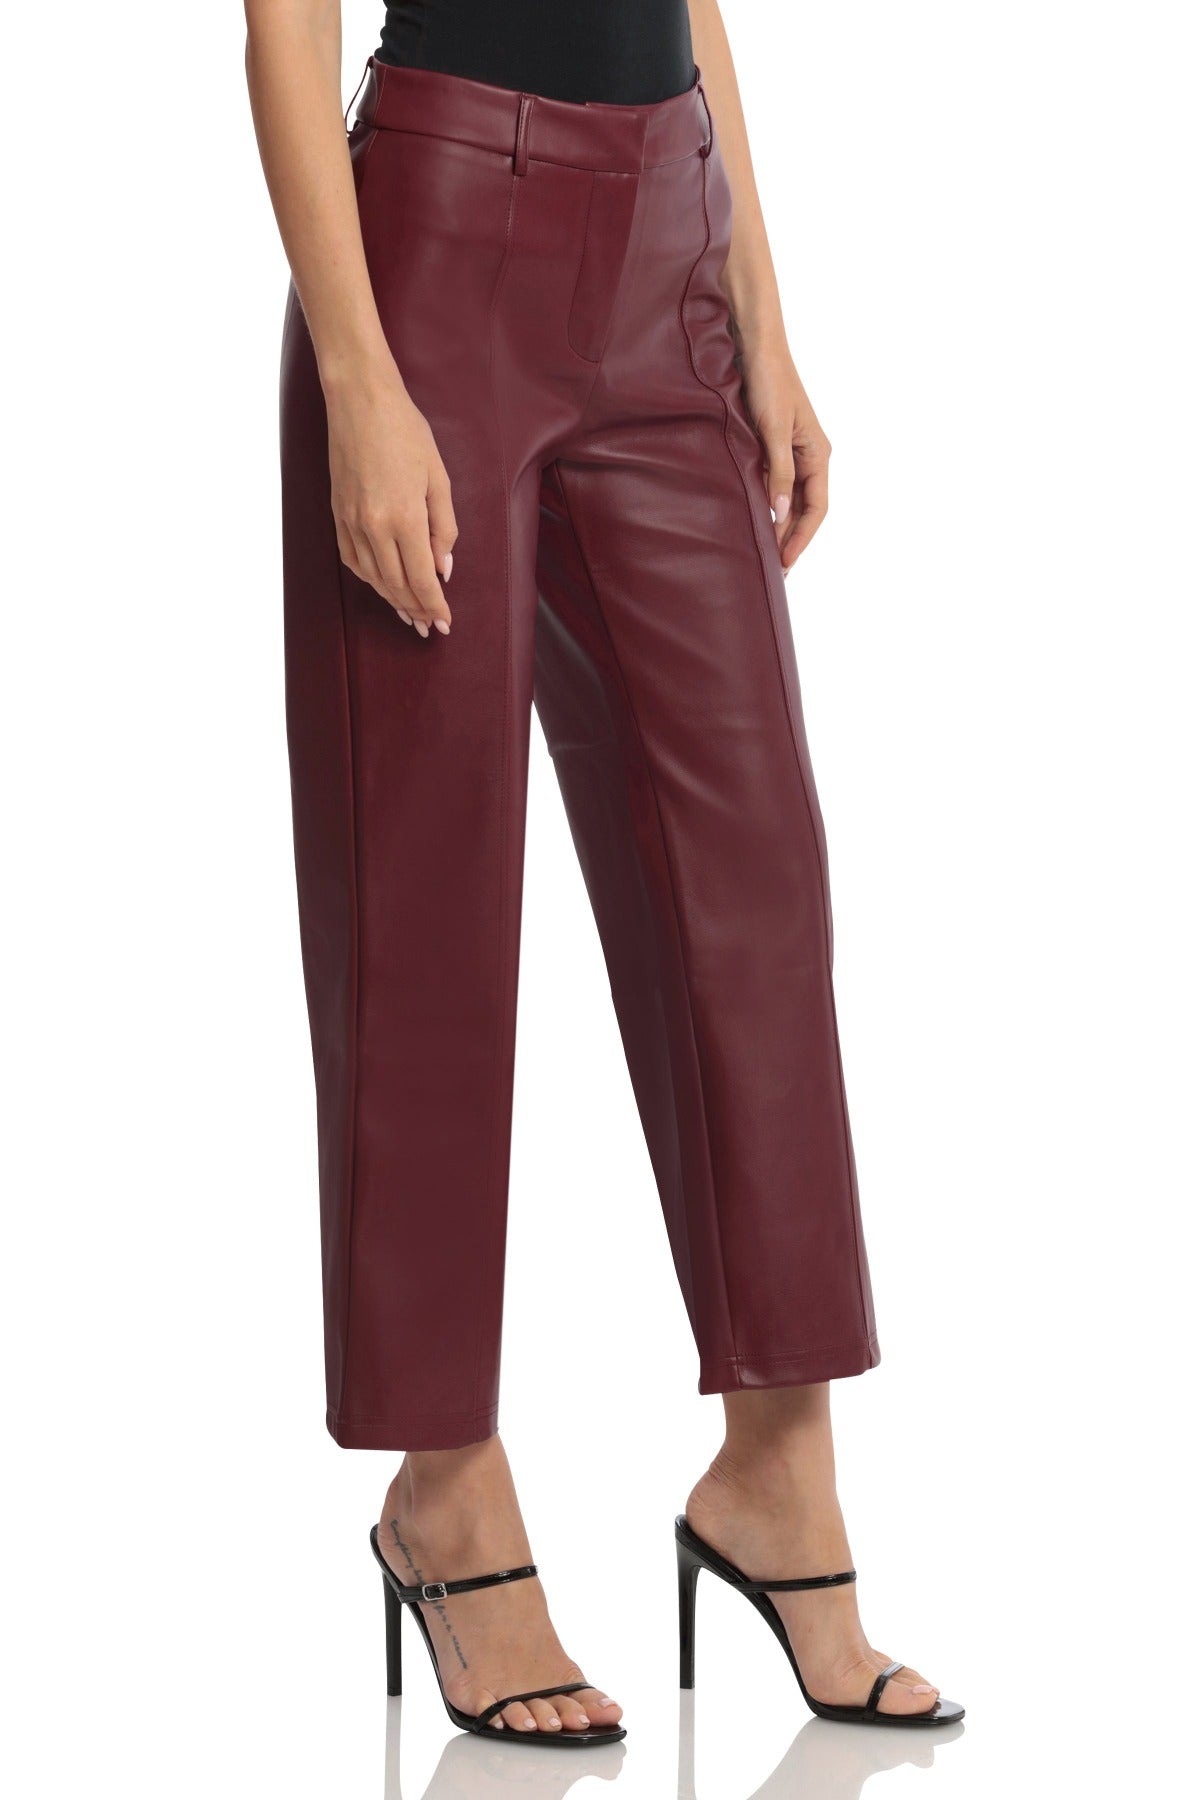 Faux Leather Seam-Front Straight Leg Trouser Pants Oxblood Red - Women's Flattering Office to Date Night Bottoms